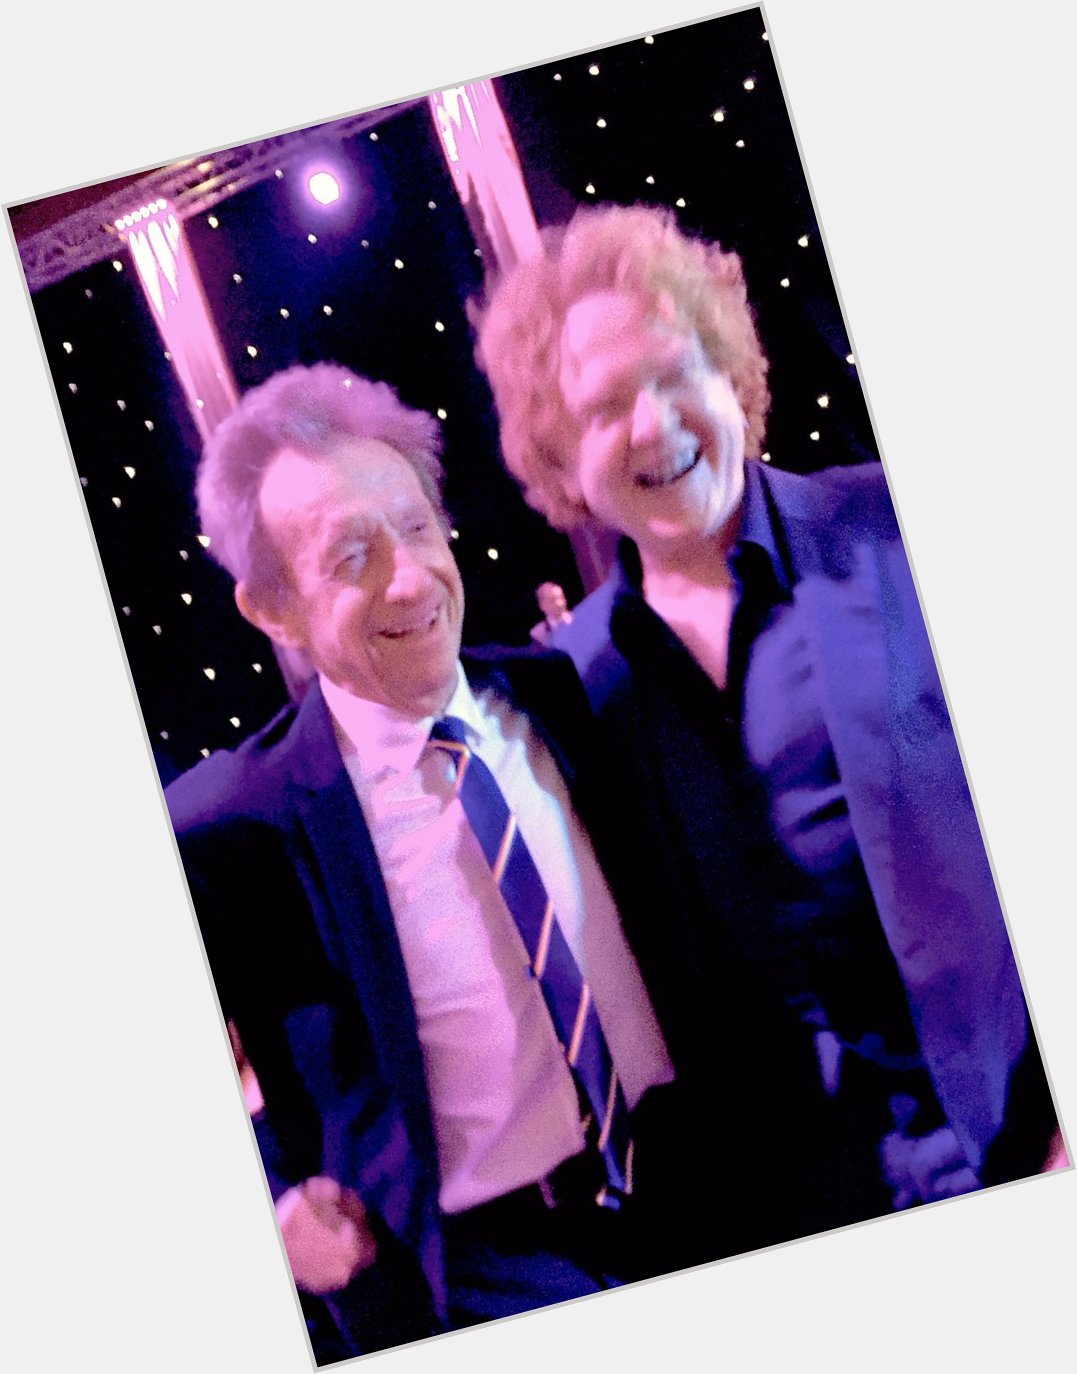 A very happy 80th birthday to my friend the great Denis Law! 